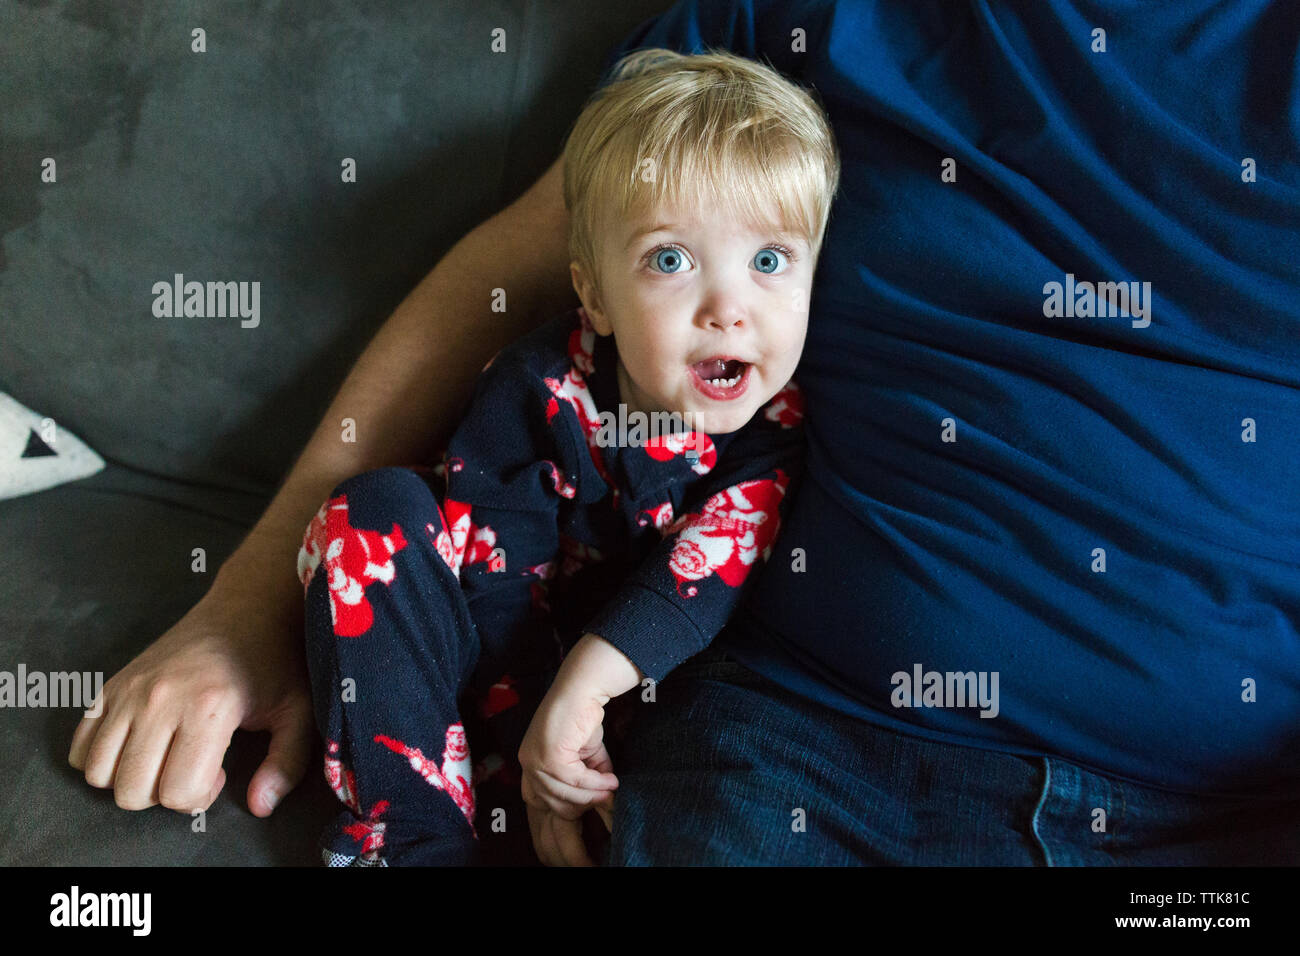 Toddler boy looks surprised while sitting next to Dad Stock Photo